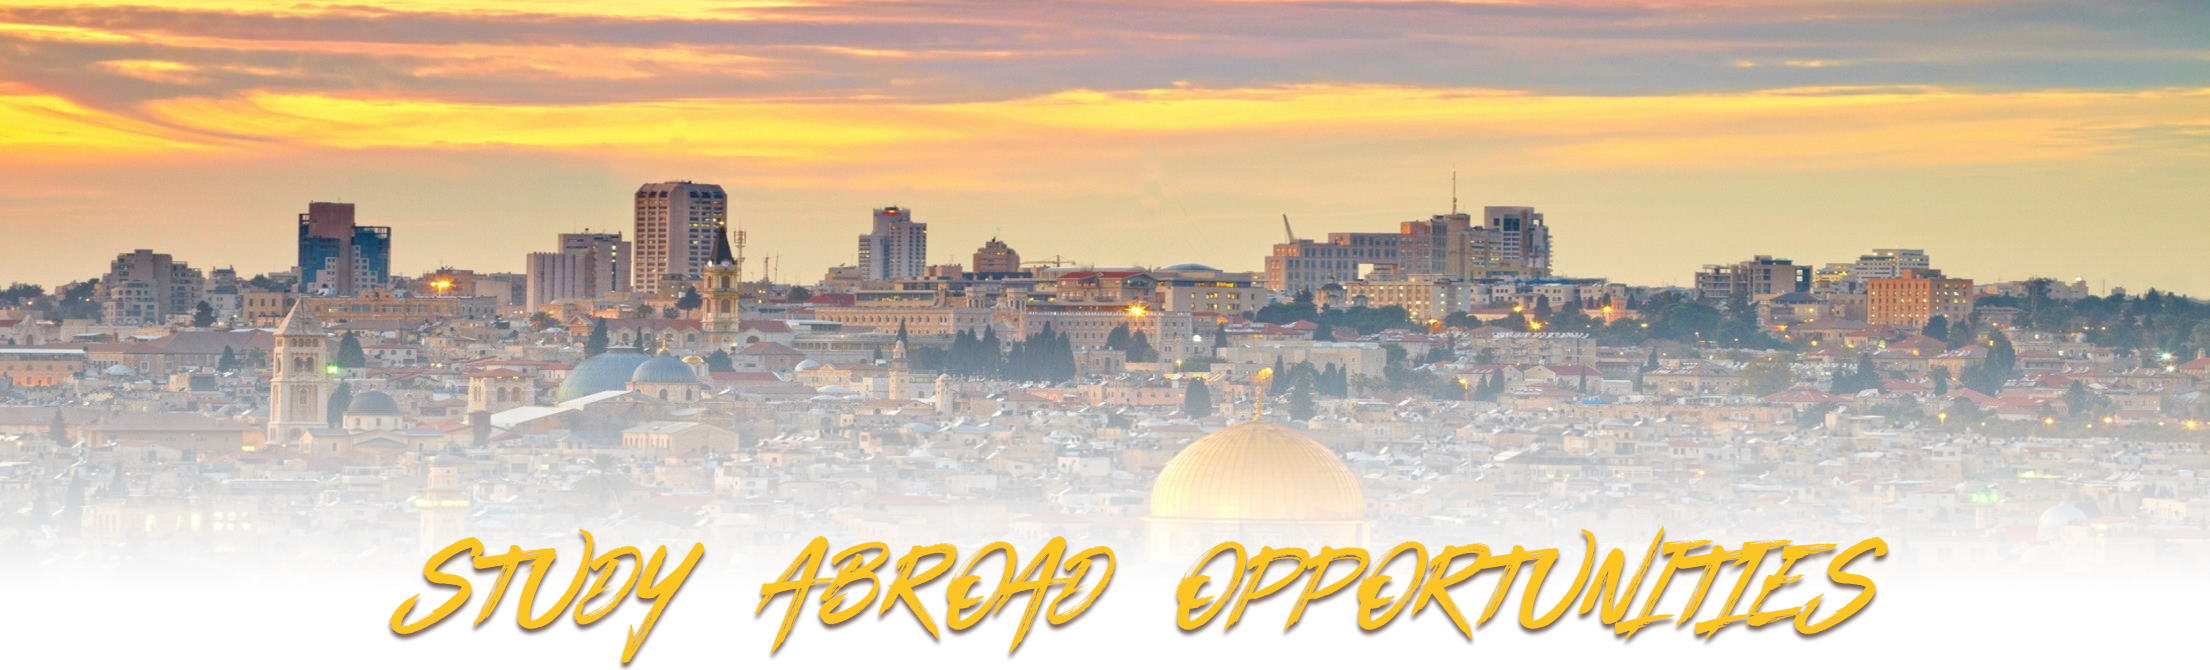 SPPAIS arabic and middle eastern studies study abroad opportunities jerusalem skyline